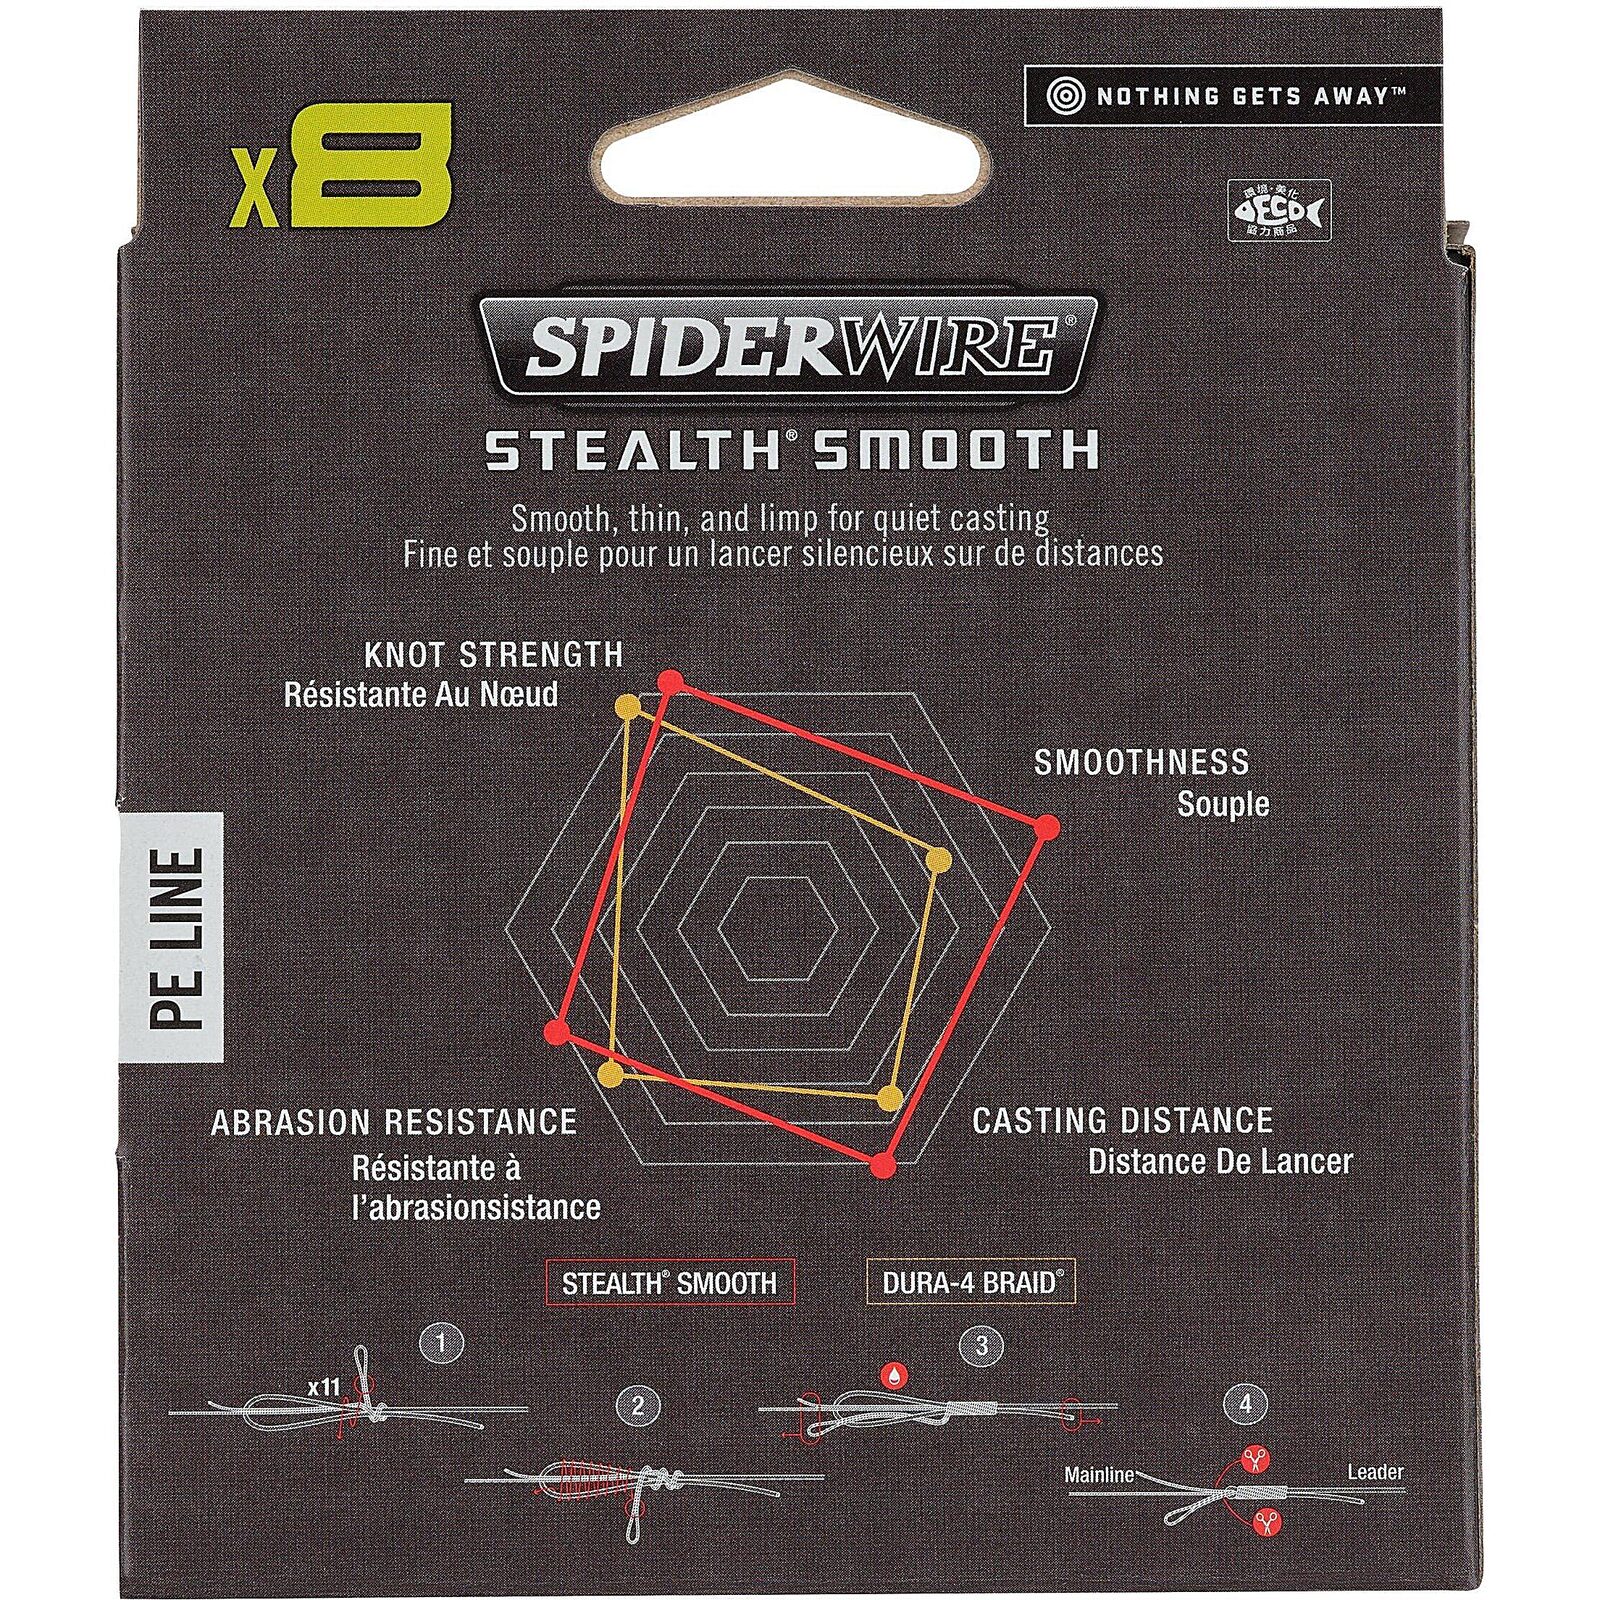 Spiderwire Stealth Smooth 8 Translucent kopen? Snelle levering!